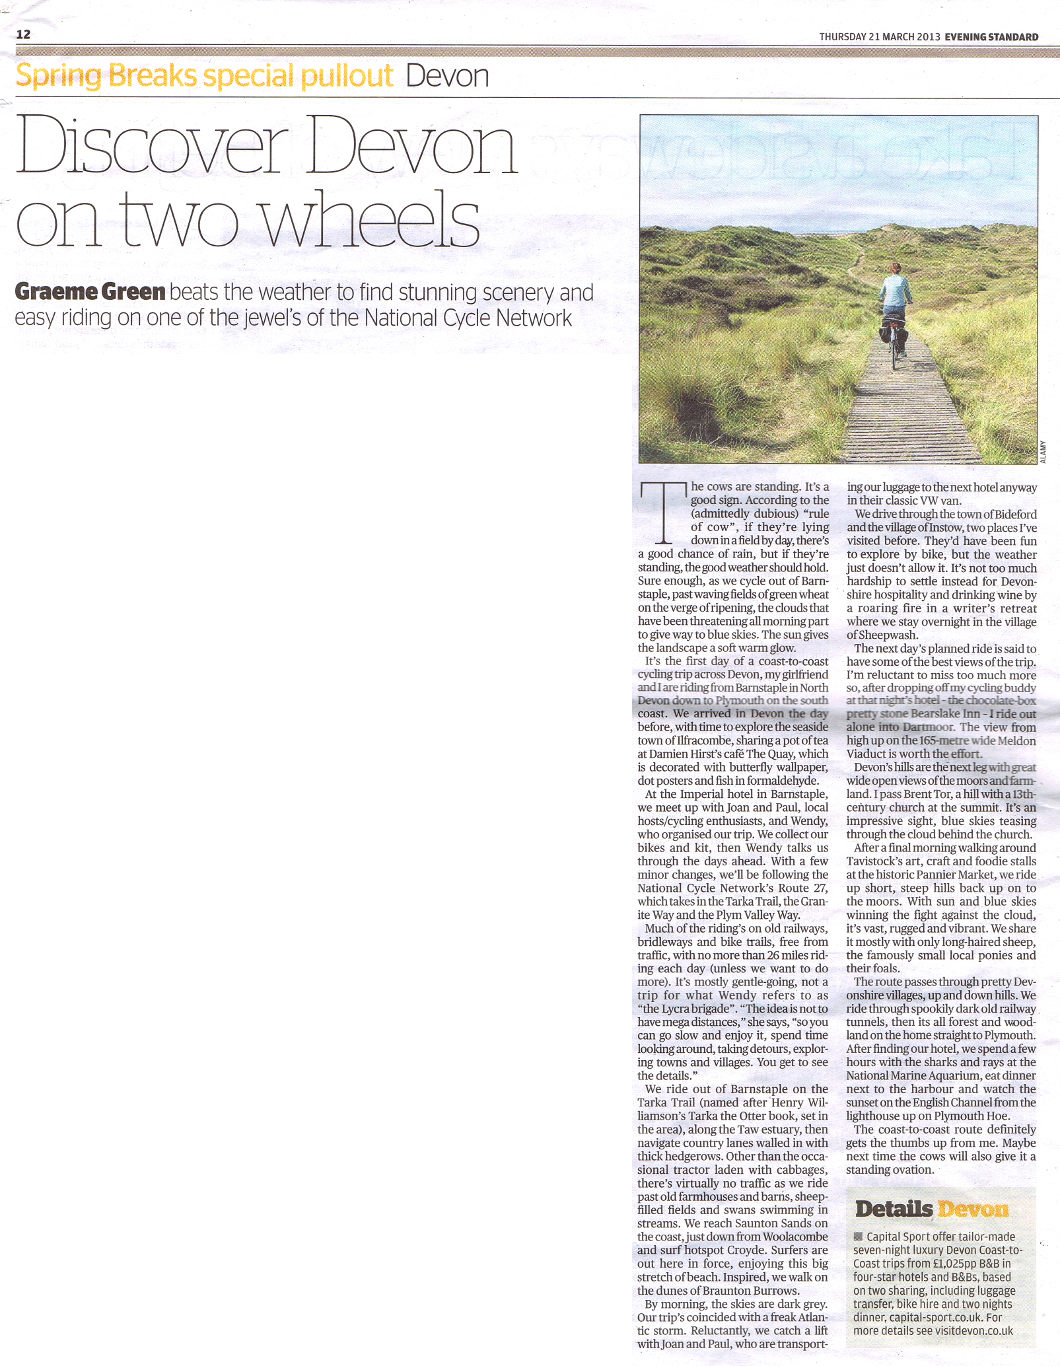 Discover Devon on two wheels, Evening Standard, 21 March 2013